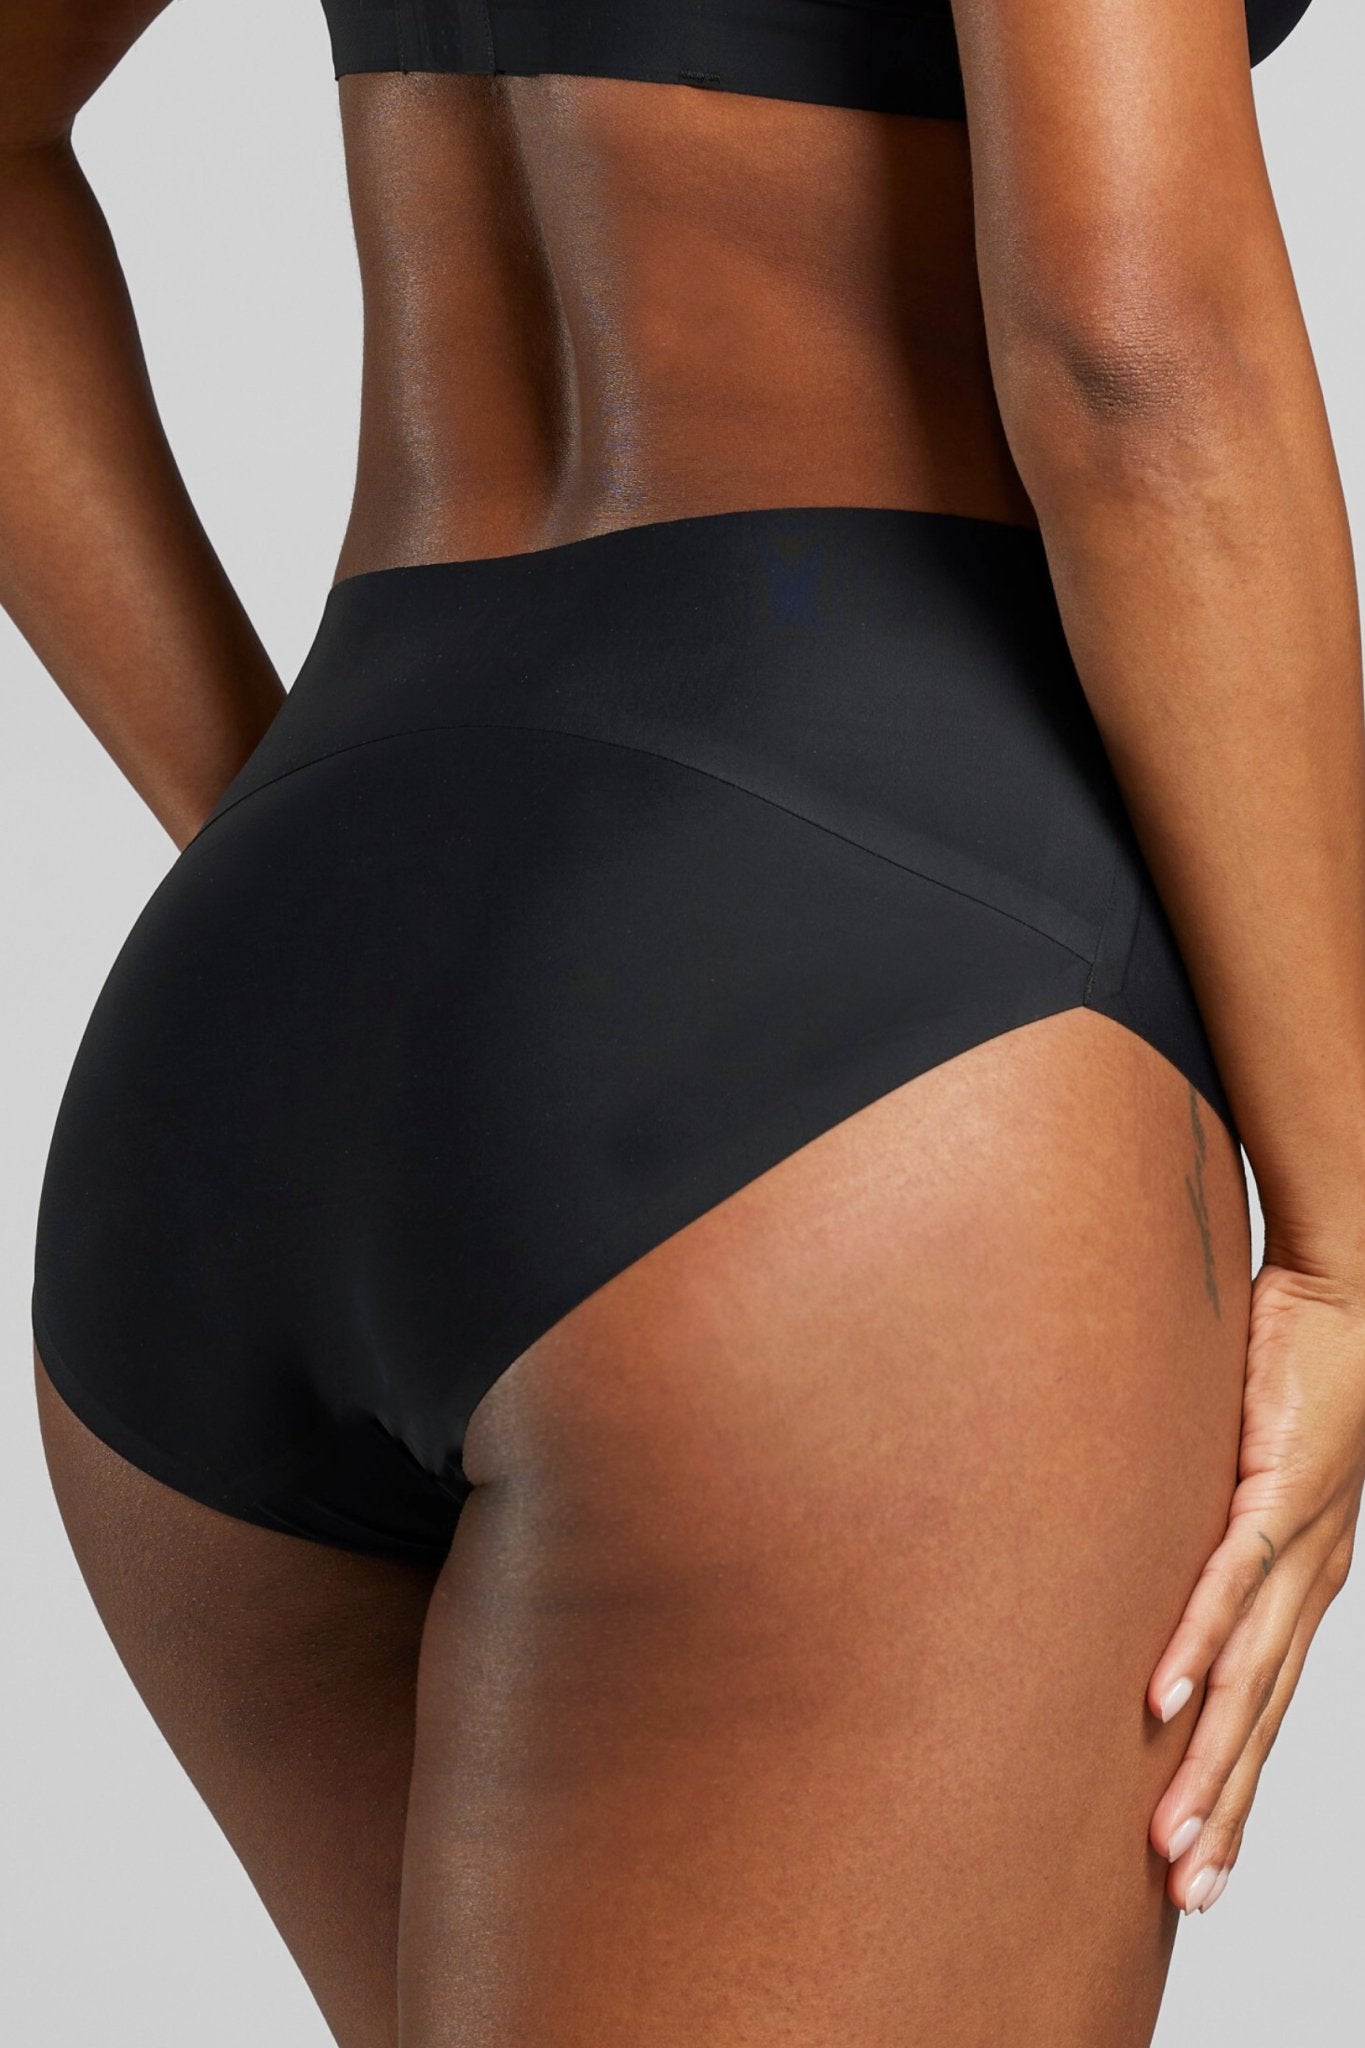 Lounge Underwear's barely there collection review